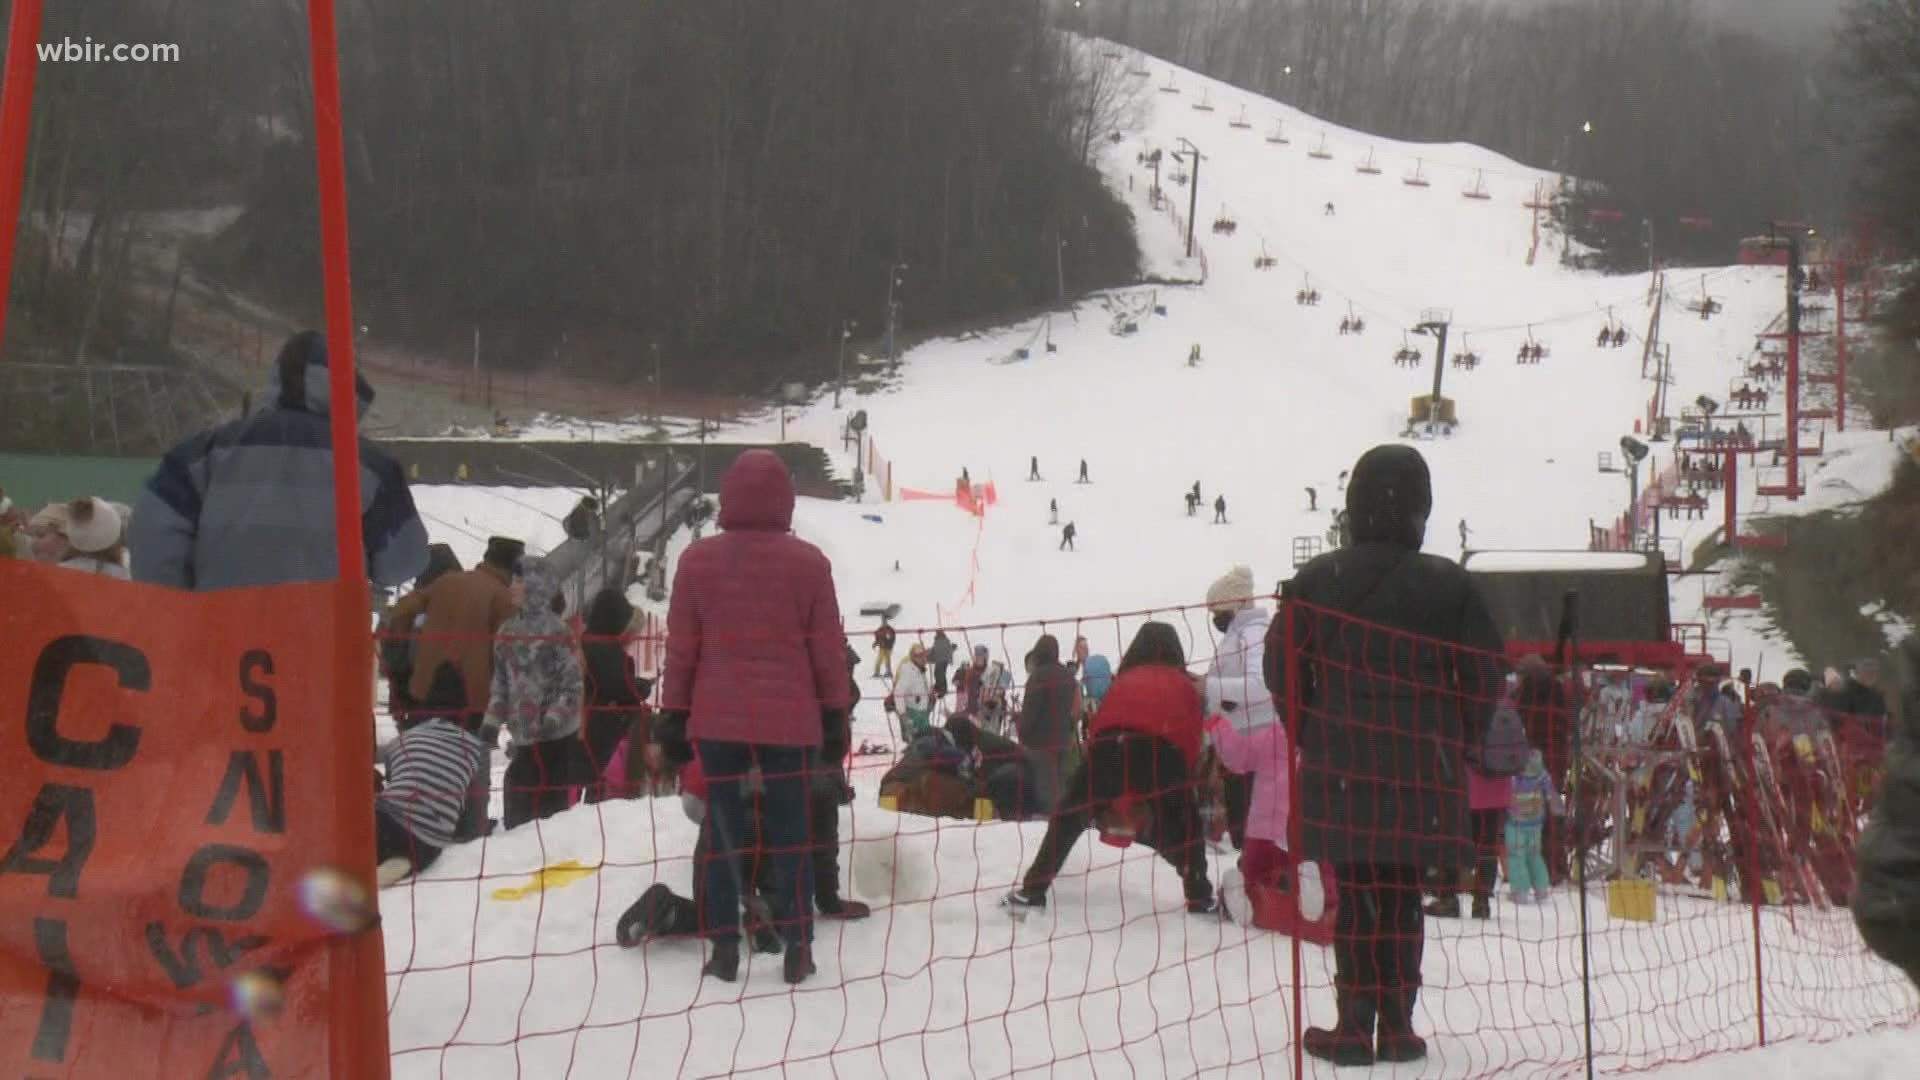 Visitors to Ober Gatlinburg got to enjoy the snow as they took to the slopes today